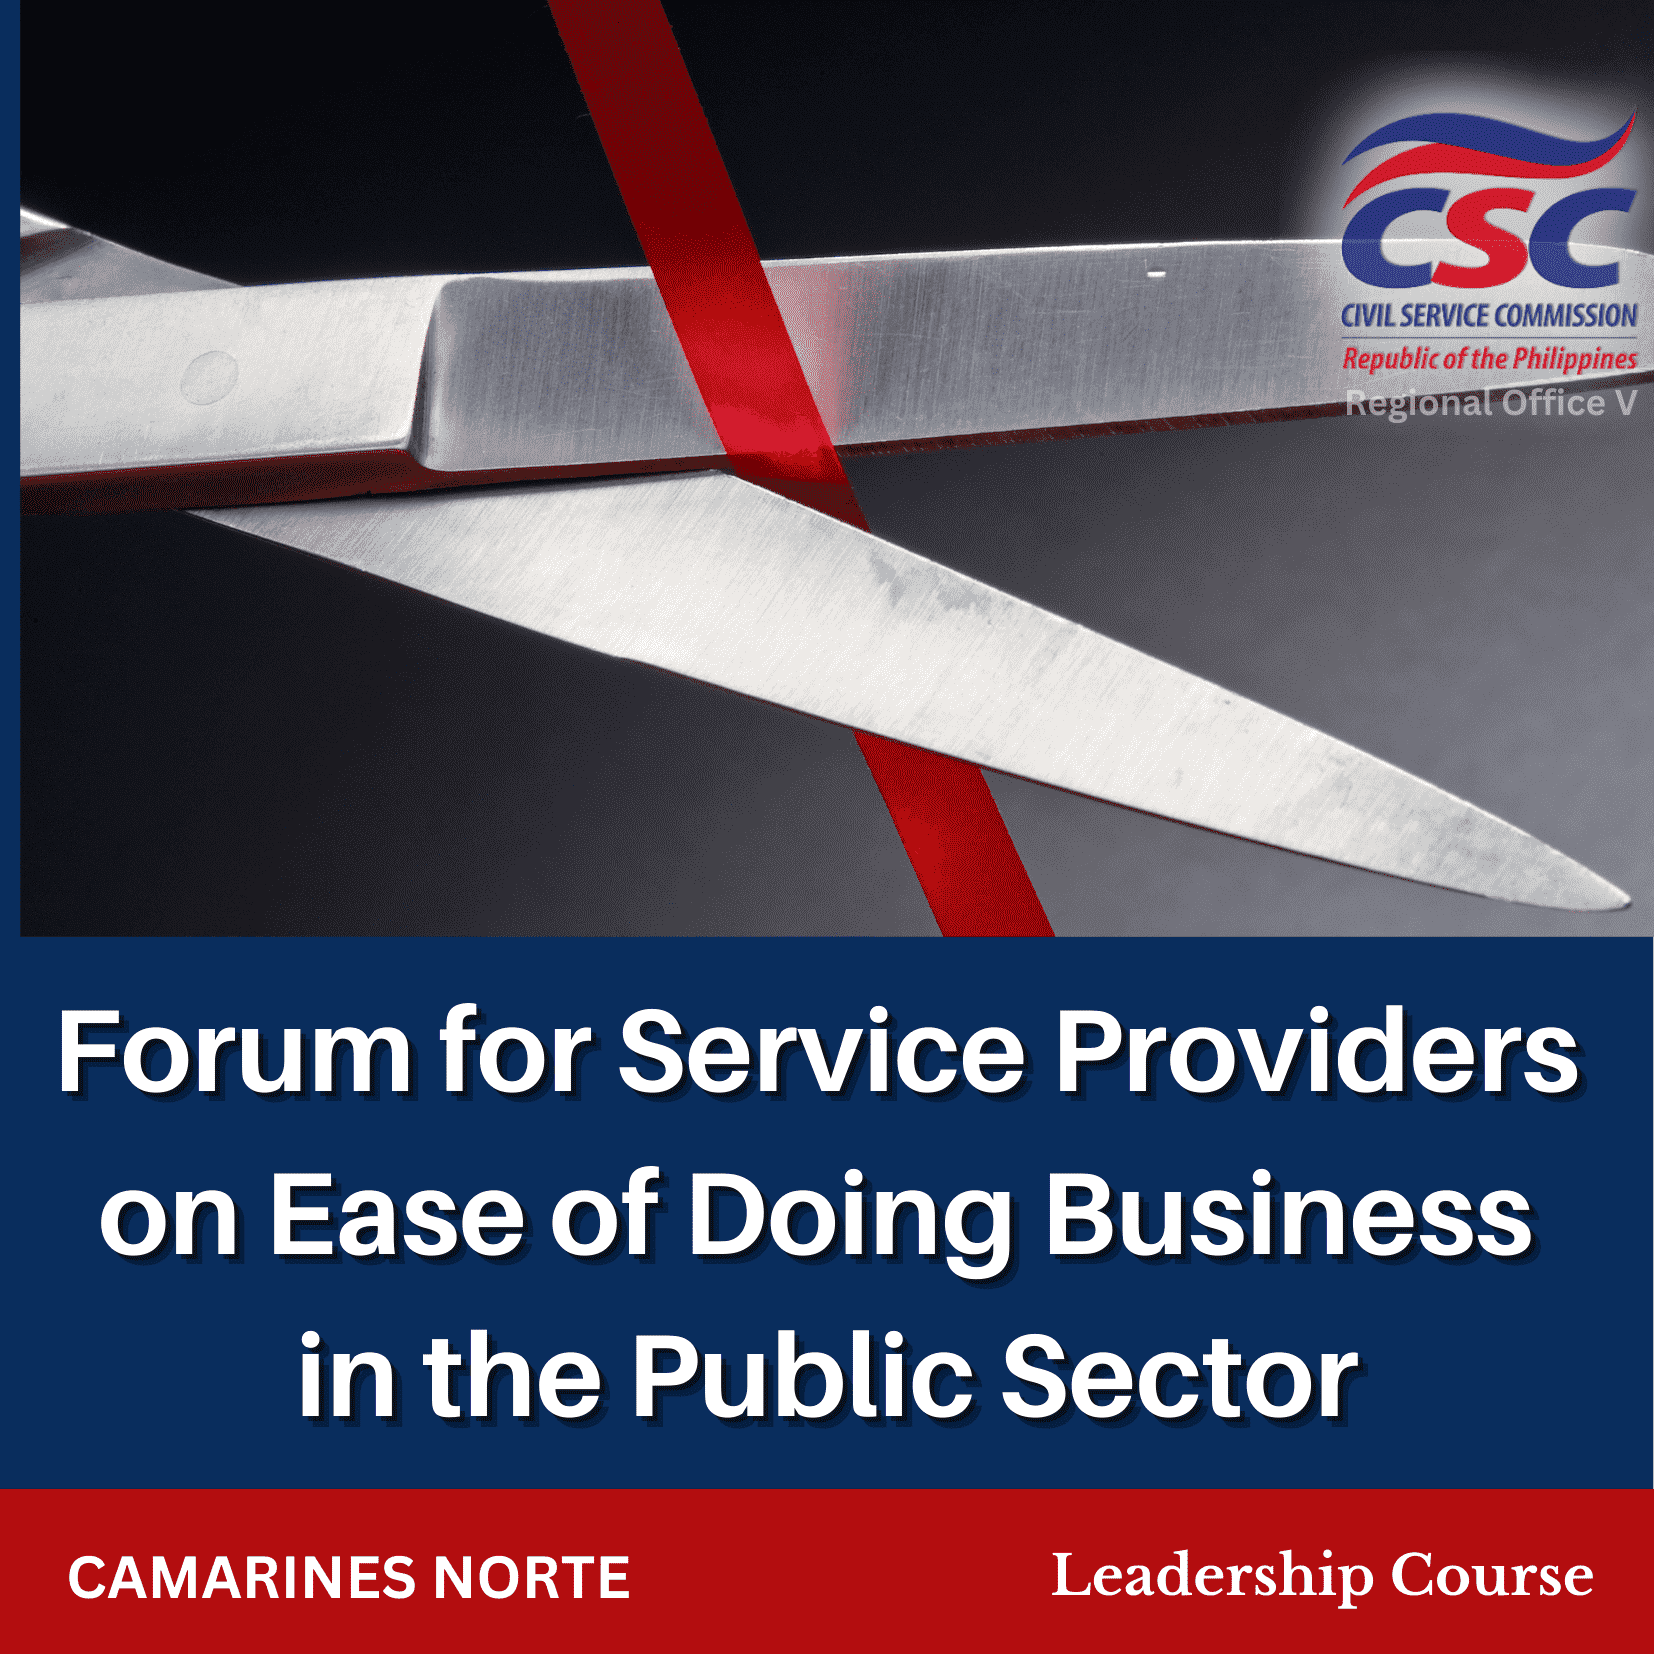 Ease of Doing Business in the Public Sector for Service Providers (Camarines Norte)